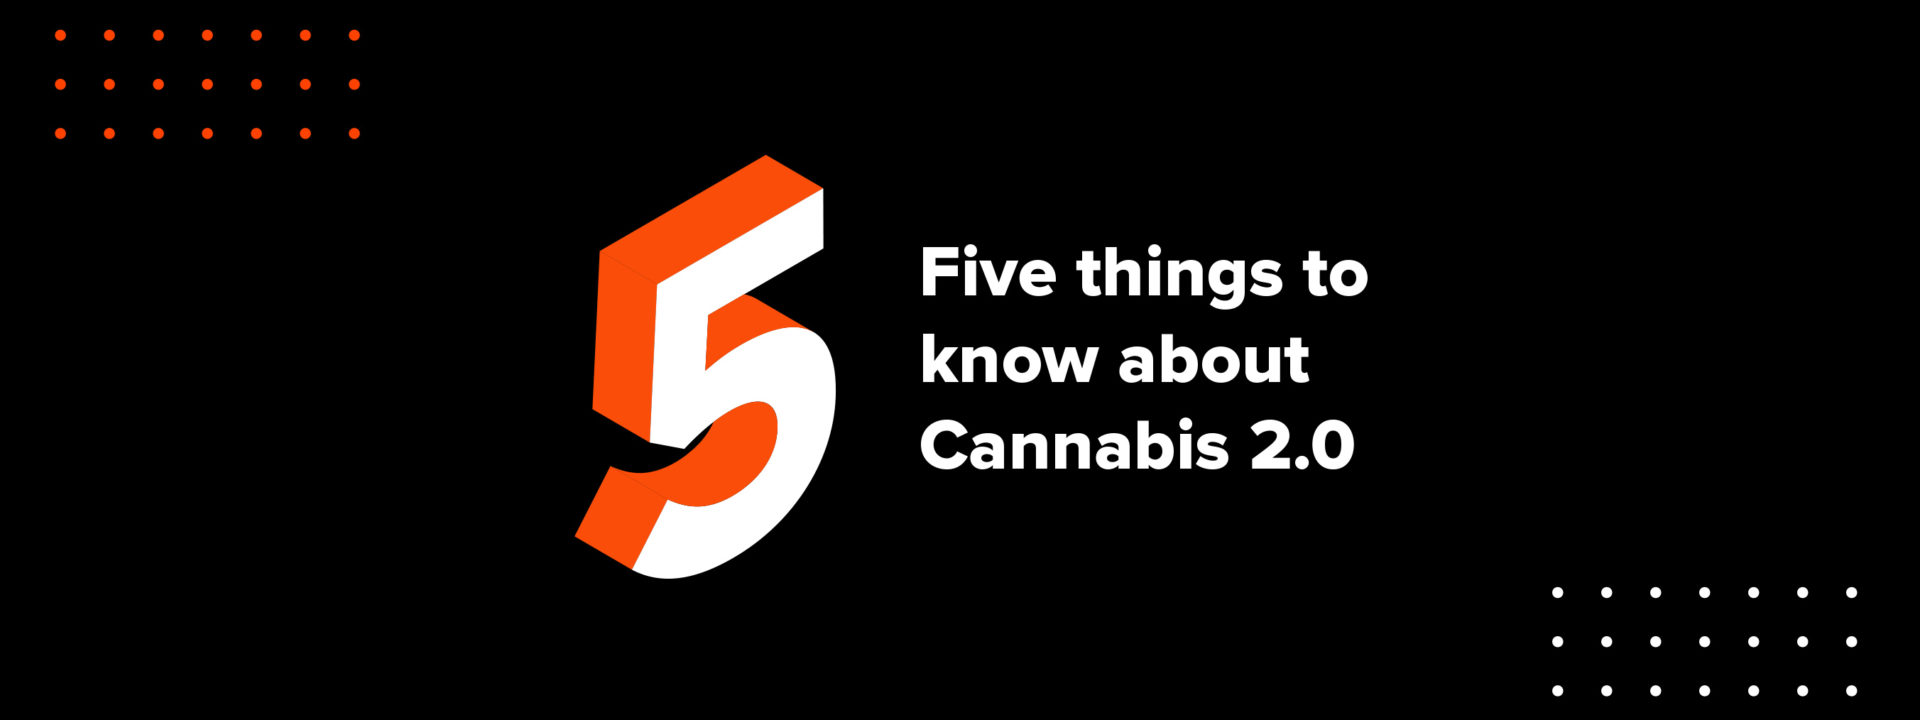 Five things to know about Cannabis 2.0